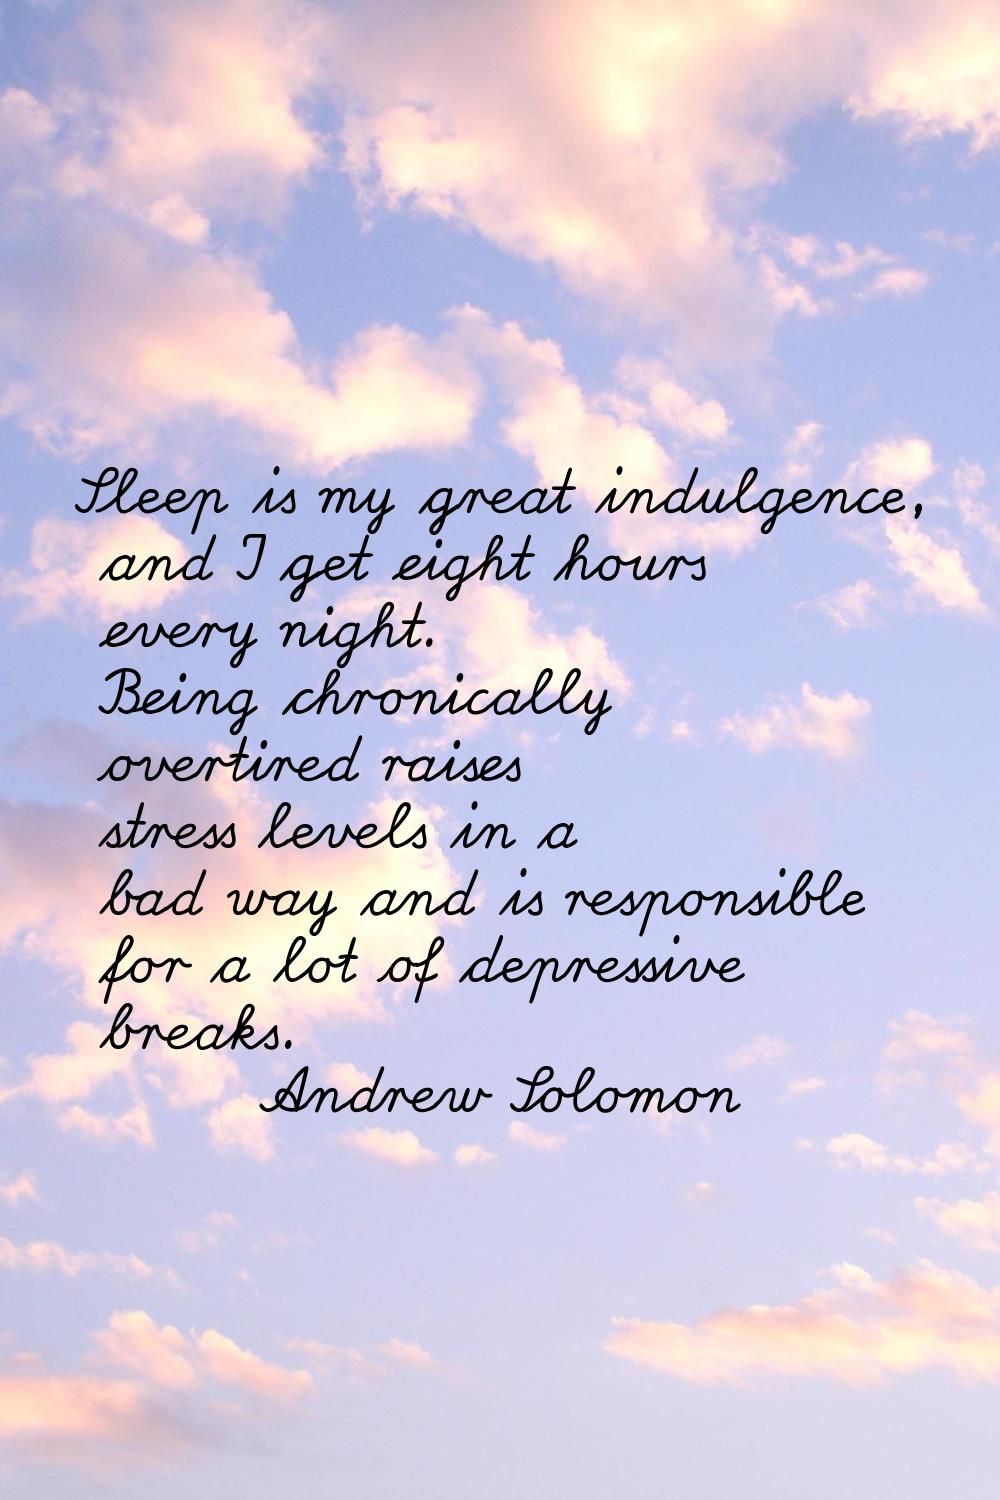 Sleep is my great indulgence, and I get eight hours every night. Being chronically overtired raises